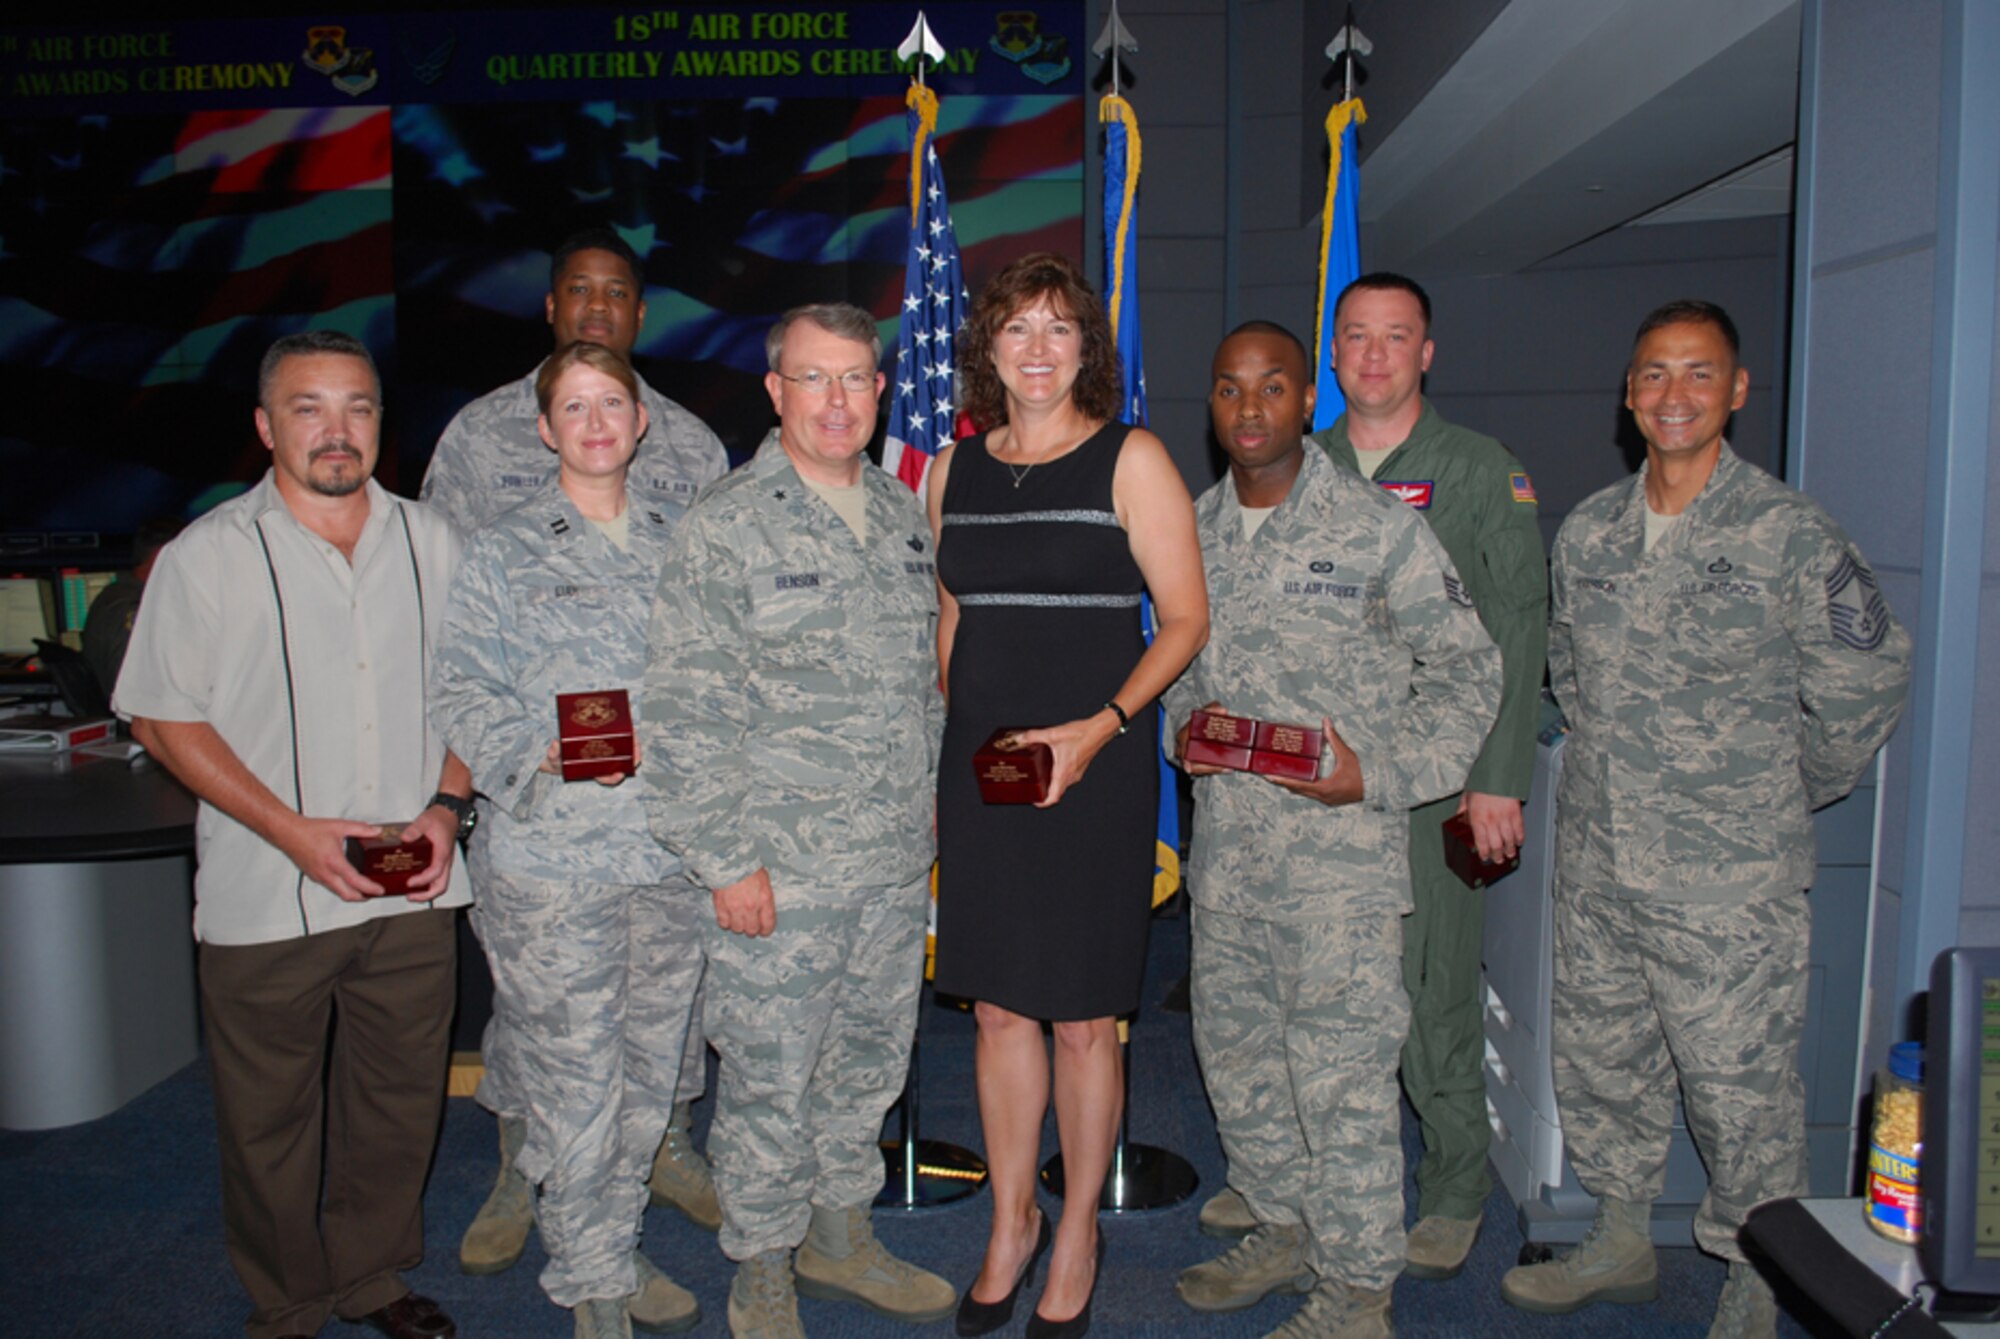 SCOTT AFB, IL -- Brig. Gen. Bryan Benson, Deputy Commander, 18th Air Force (center) and Chief Master Sgt. Andrew Henderson, 618th Air and Space Operations Center (Tanker Airlift Control Center) Superintendent (far right), presented the command's hadquarters-level second quarter awards here July 12.  

From left to right, Douglas Rader, Civilian of the Quarter, Category II; Capt. Faith Eudy, Company Grade Officer of the Quarter; Senior Airman Jamar Fowler, Junior Enlisted Member of the Quarter; Lara Morrison, Civilian of the Quarter, Category III; Staff Sgt. Joseph Venable, NCO and Volunteer of the Quarter; and Maj. Nicholas Schindler, Field Grade Officer of the Quarter.  Not pictured:  Master Sgt. Richard Martin, Senior NCO of the Quarter and Mrs. Ann Lomax, Civilian of the Quarter, Category I. (U.S. Air Force Photo/1st Lt. Marshel Slater).
